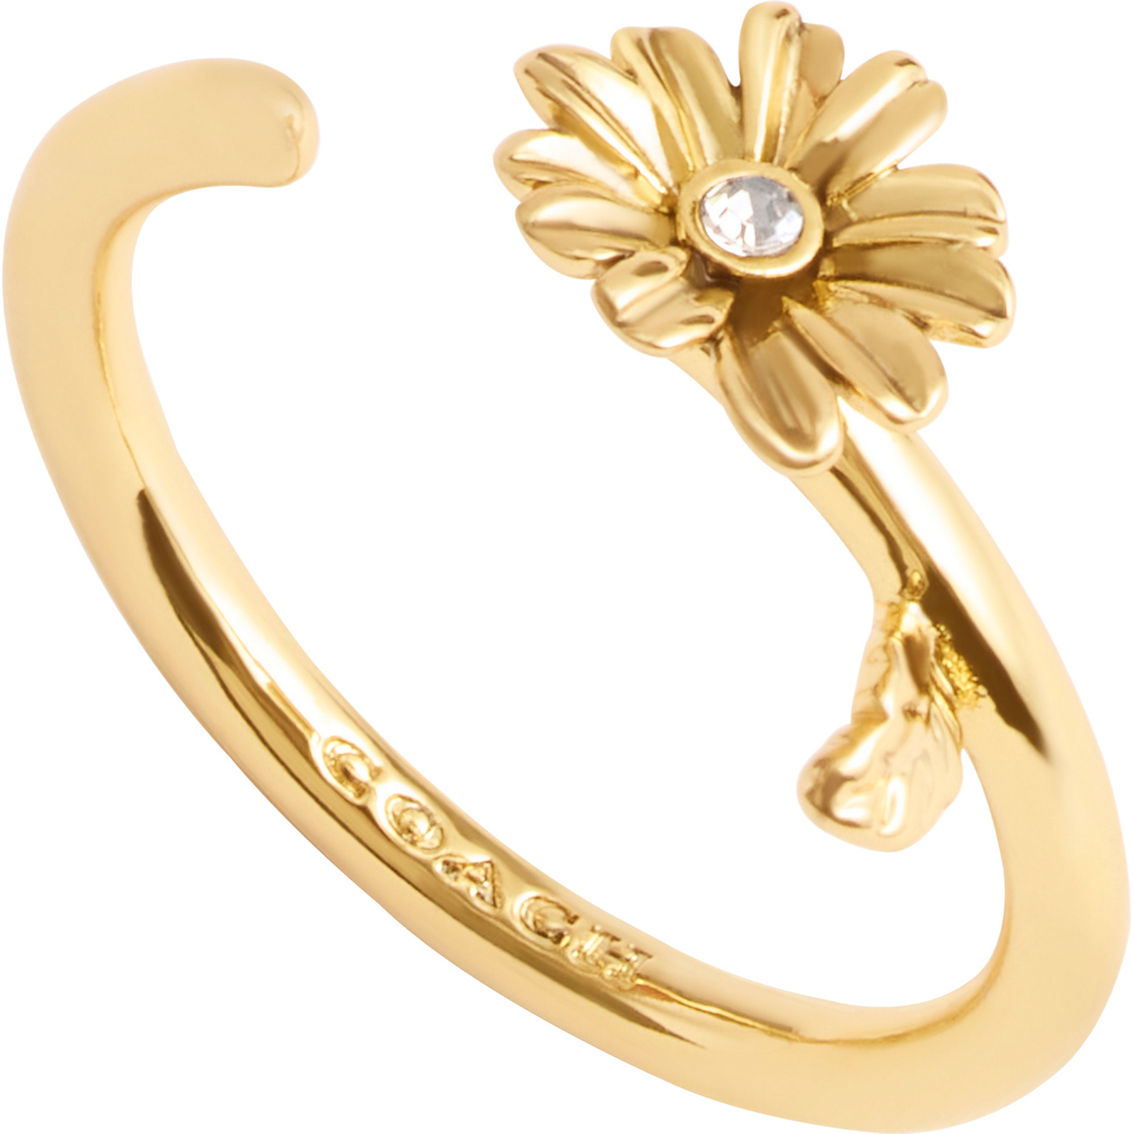 Coach Gold Daisy Open Band Ring Size 7 - Image 2 of 3